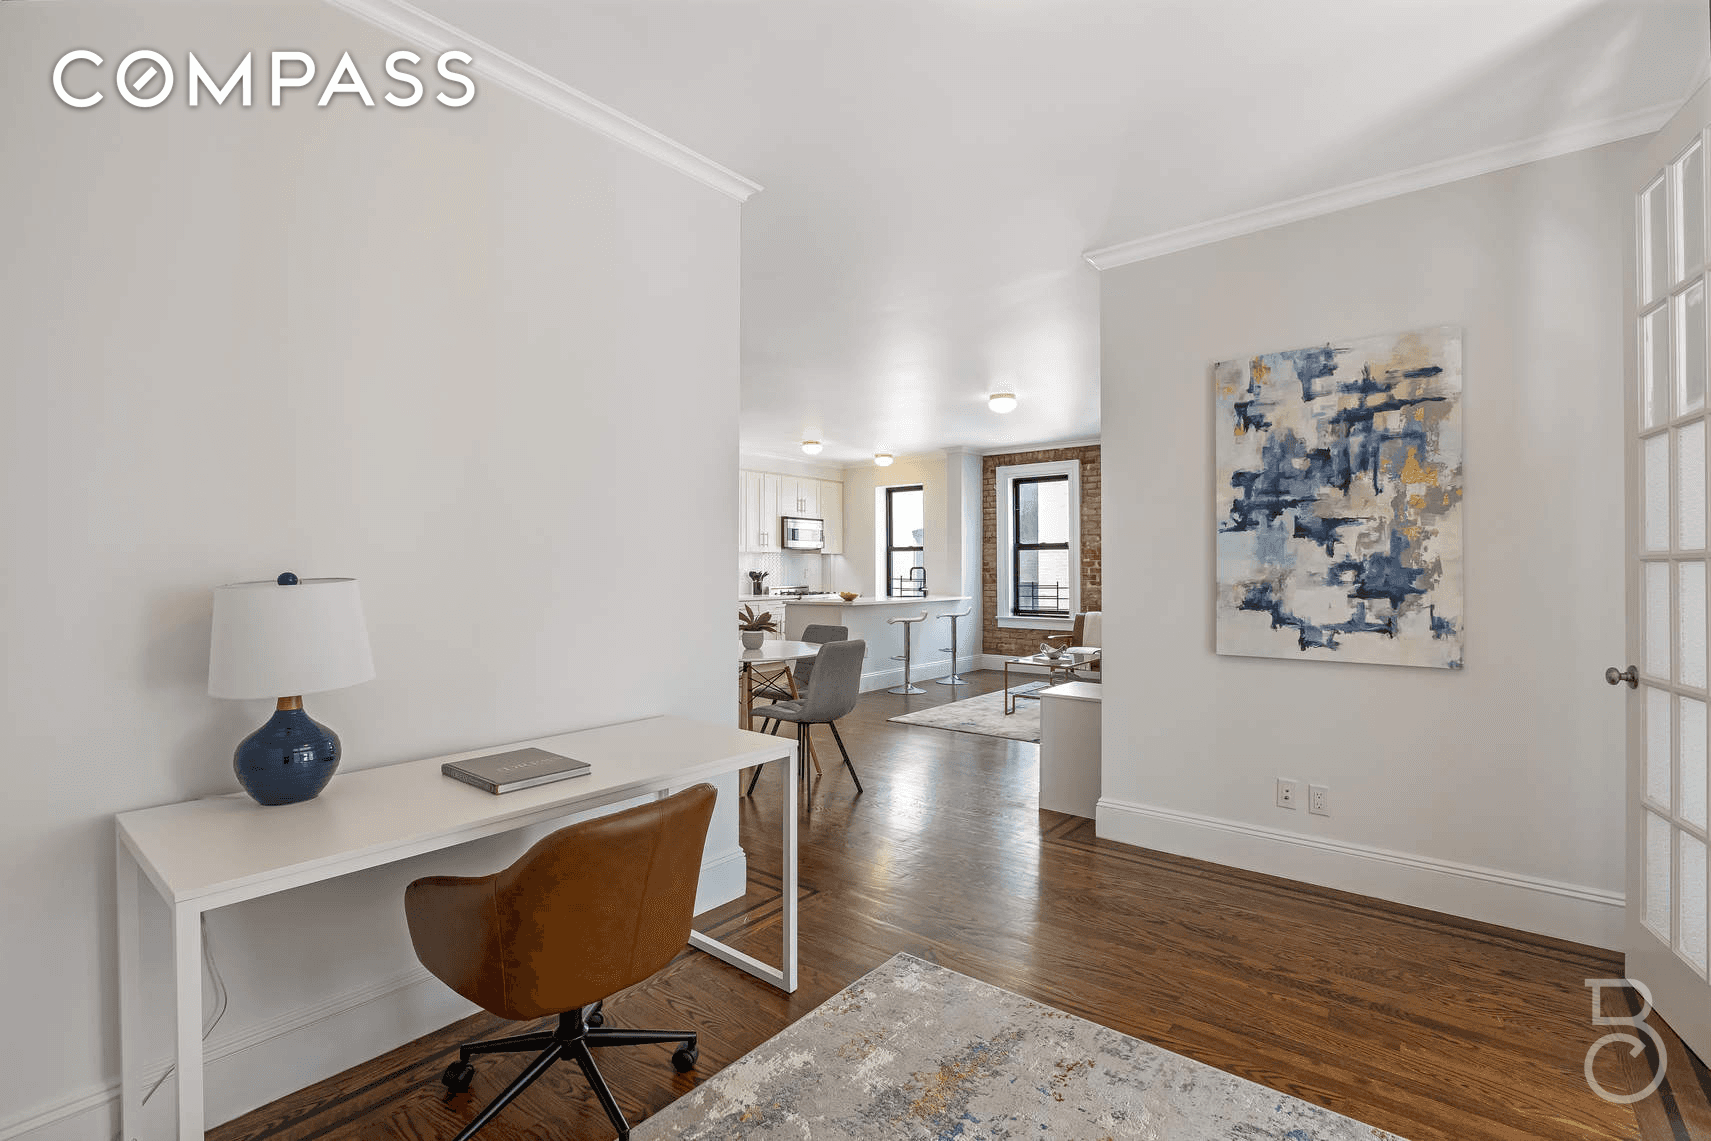 Pre war charm meets modern luxuries with this enormous and turn key 3 Bedroom 2 Bath home in the sophisticated and amenity filled Astoria Lights Complex.